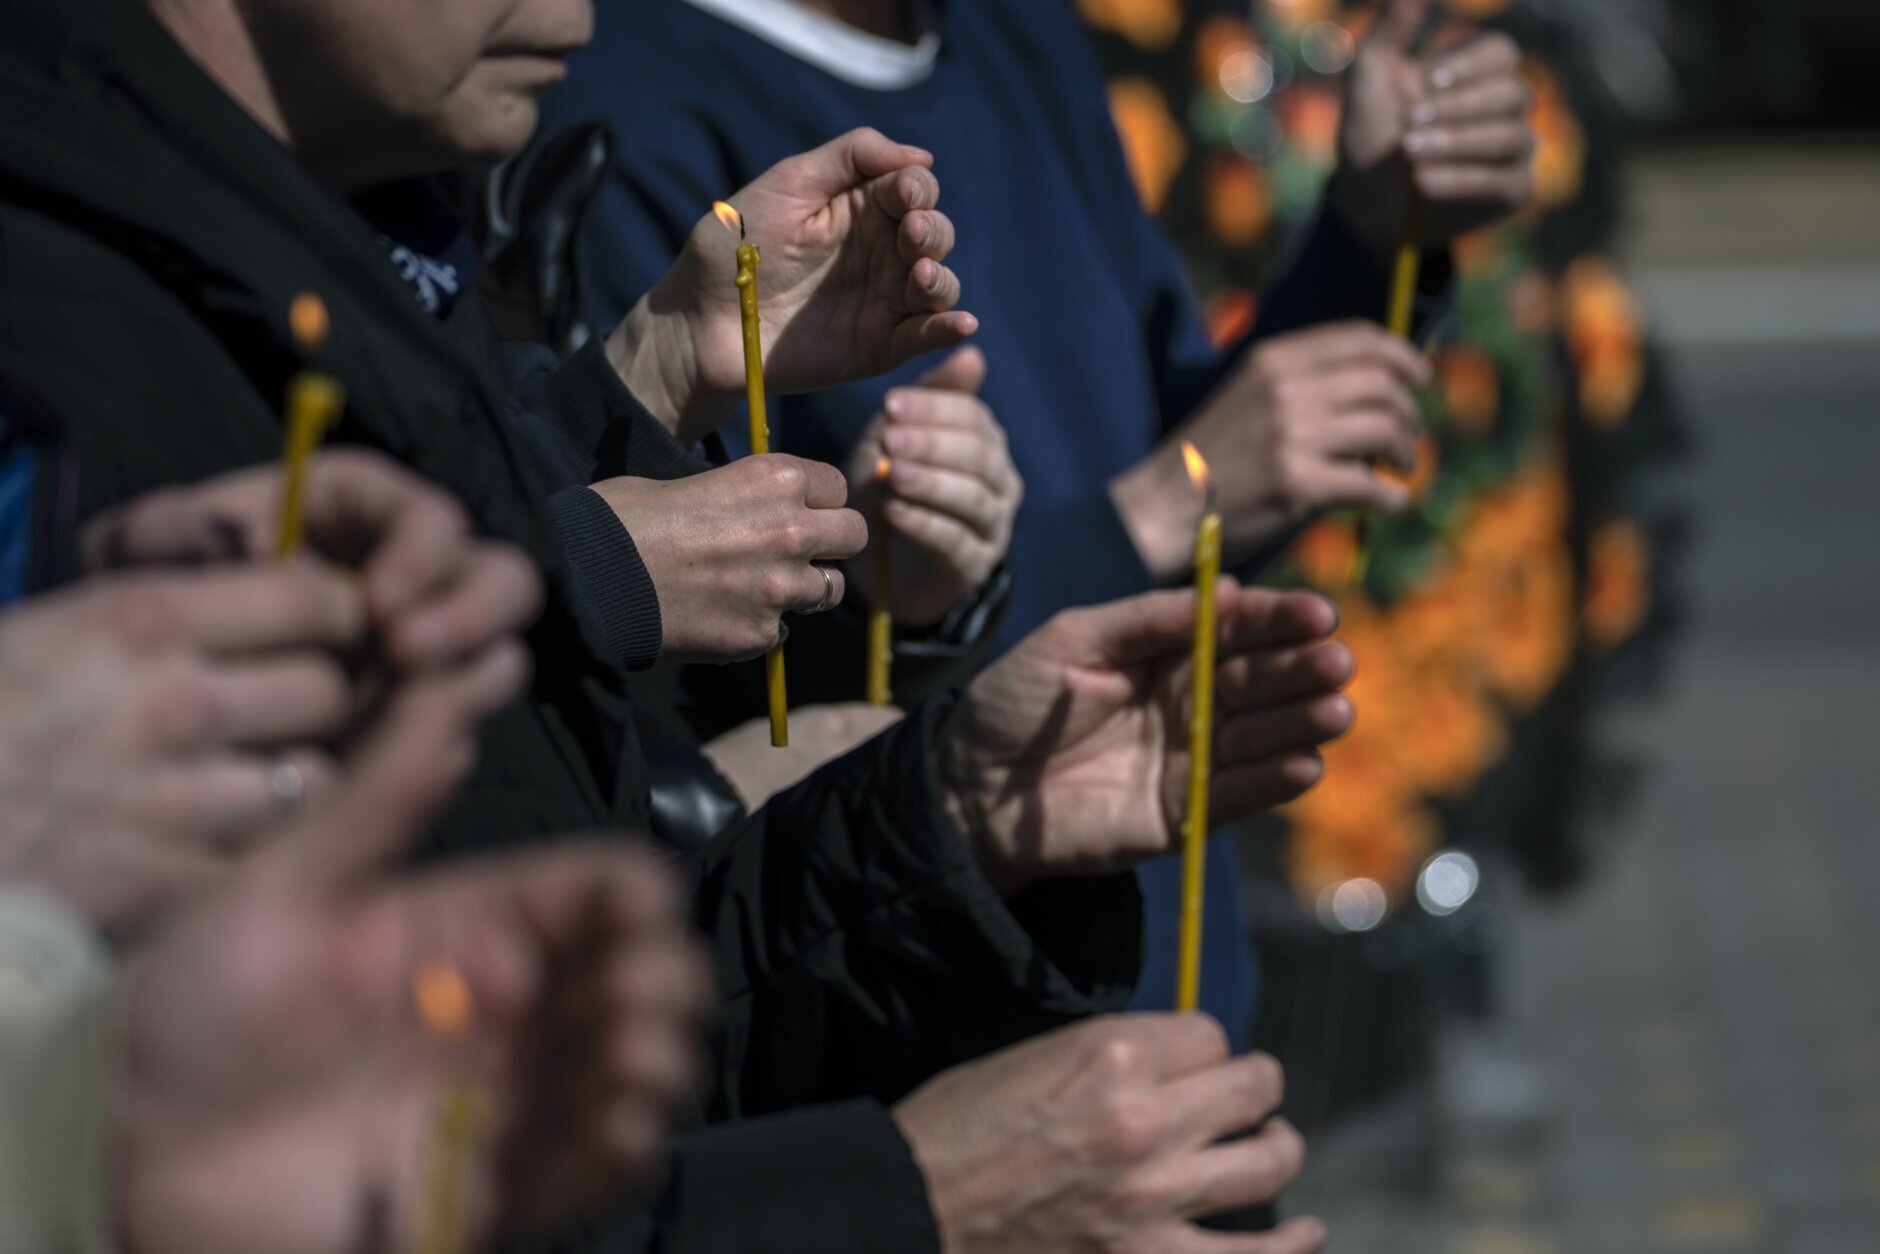 Relatives light candles while attending the funeral of Anatoliy Kolesnikov, 30, and Oleksandr Mozheiko, 31, both territorial defense soldiers who were killed by Russian, in Irpin, in the outskirts of Kyiv, Ukraine, Friday, April 15, 2022. (AP Photo/Rodrigo Abd)